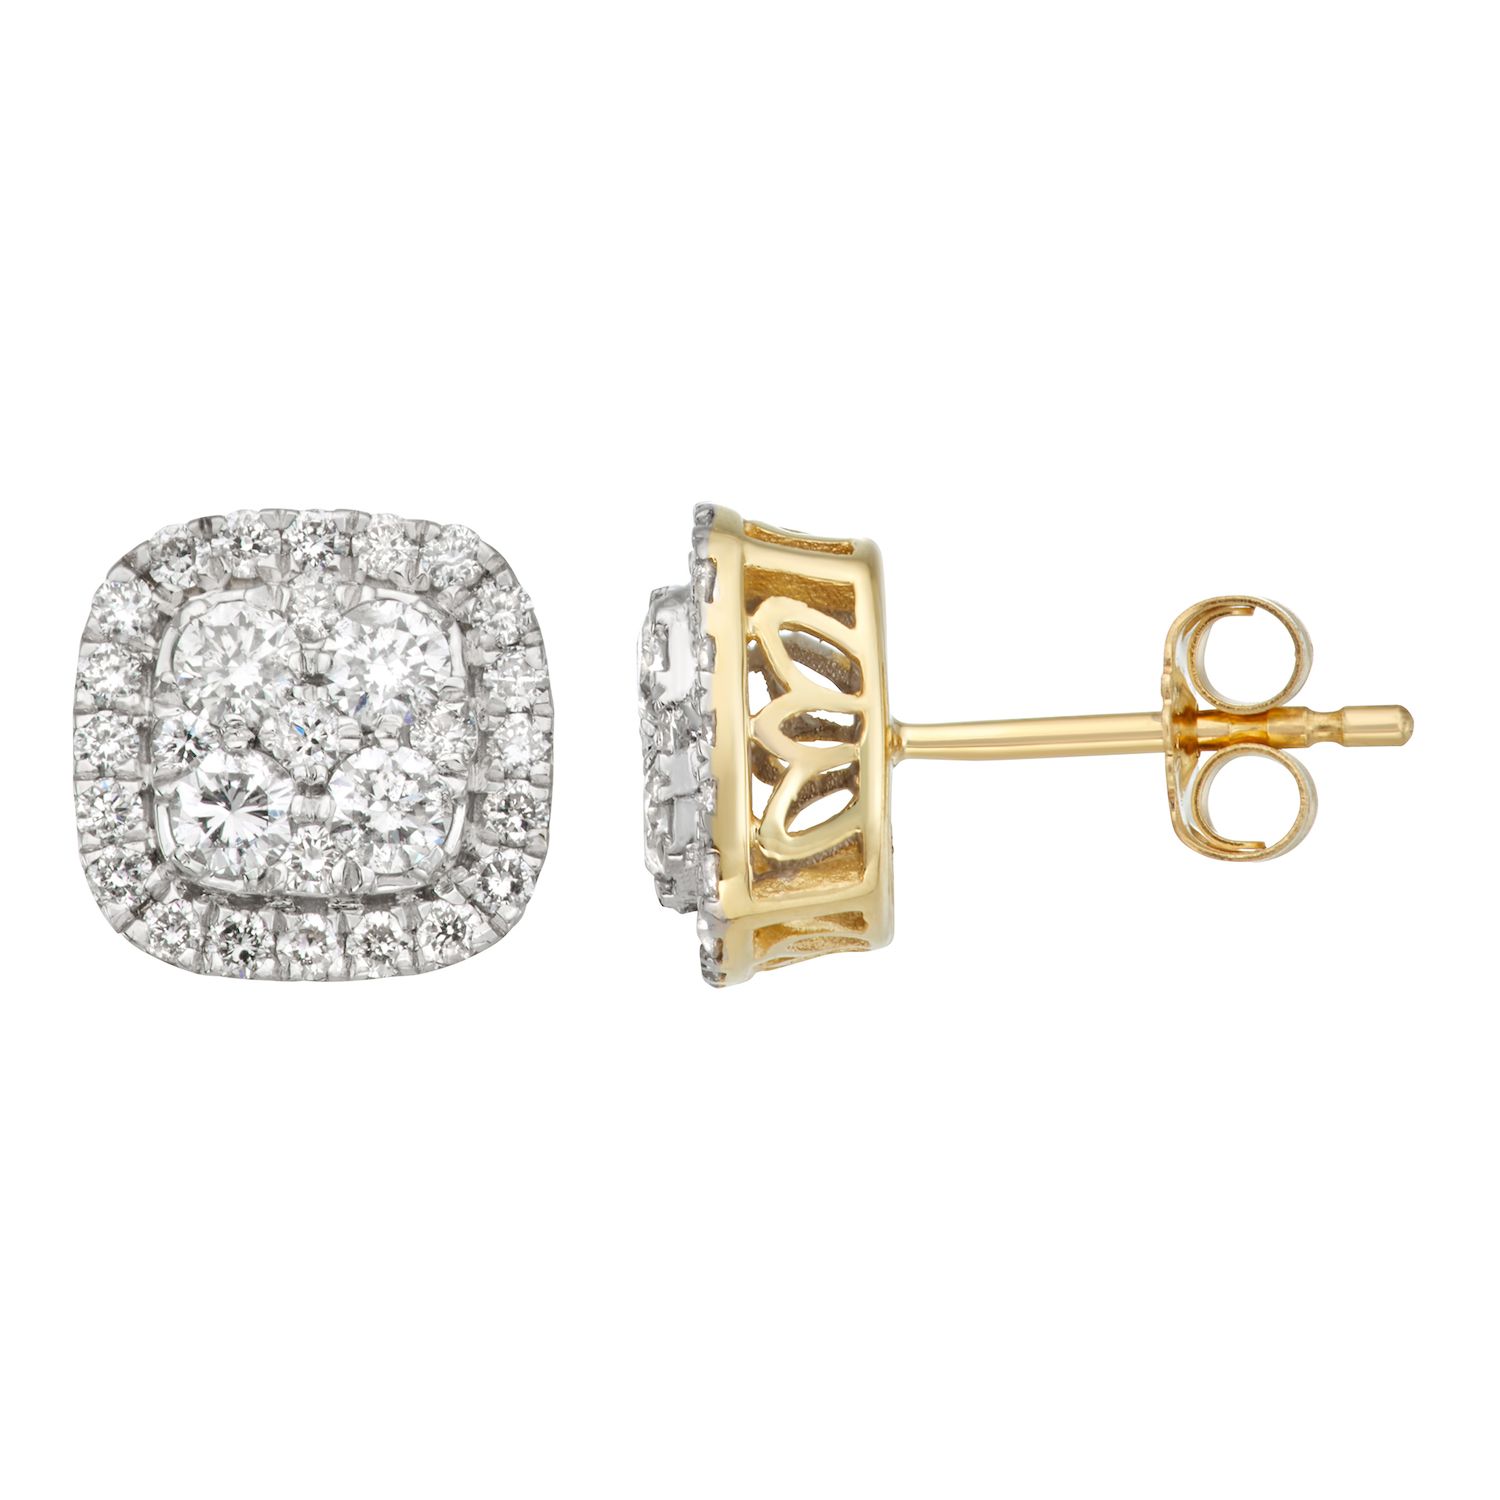 Image for HDI 14k Gold 1 Carat T.W. Diamond Cushion Halo Stud Earrings at Kohl's.